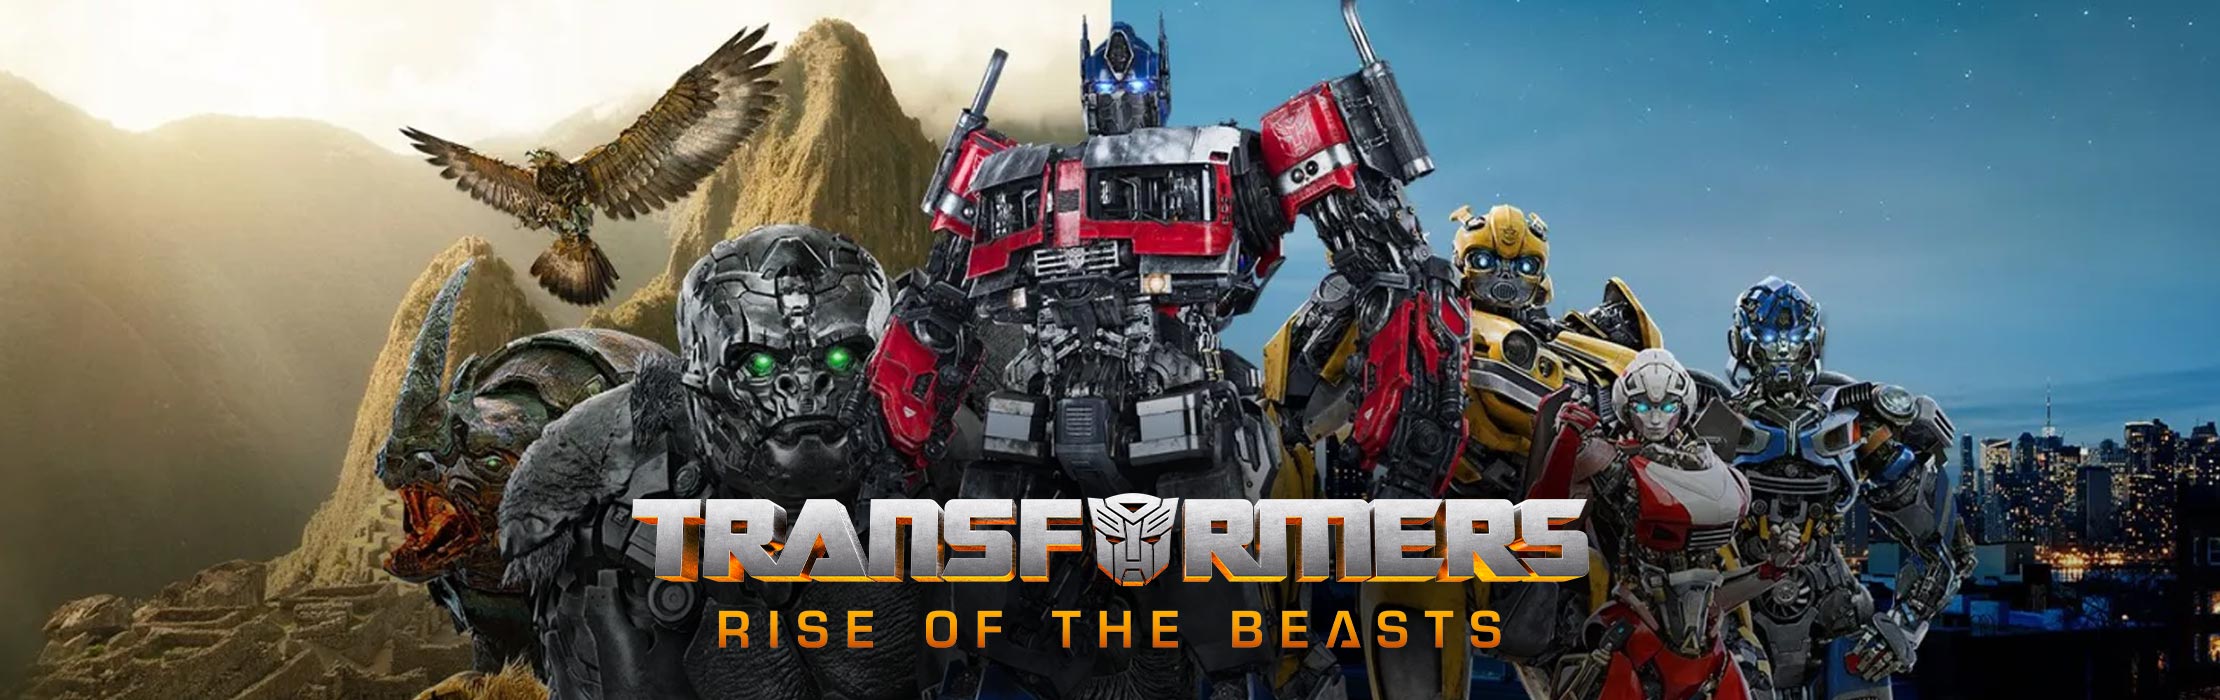 /film/Transformers:-Rise-of-the-Beasts